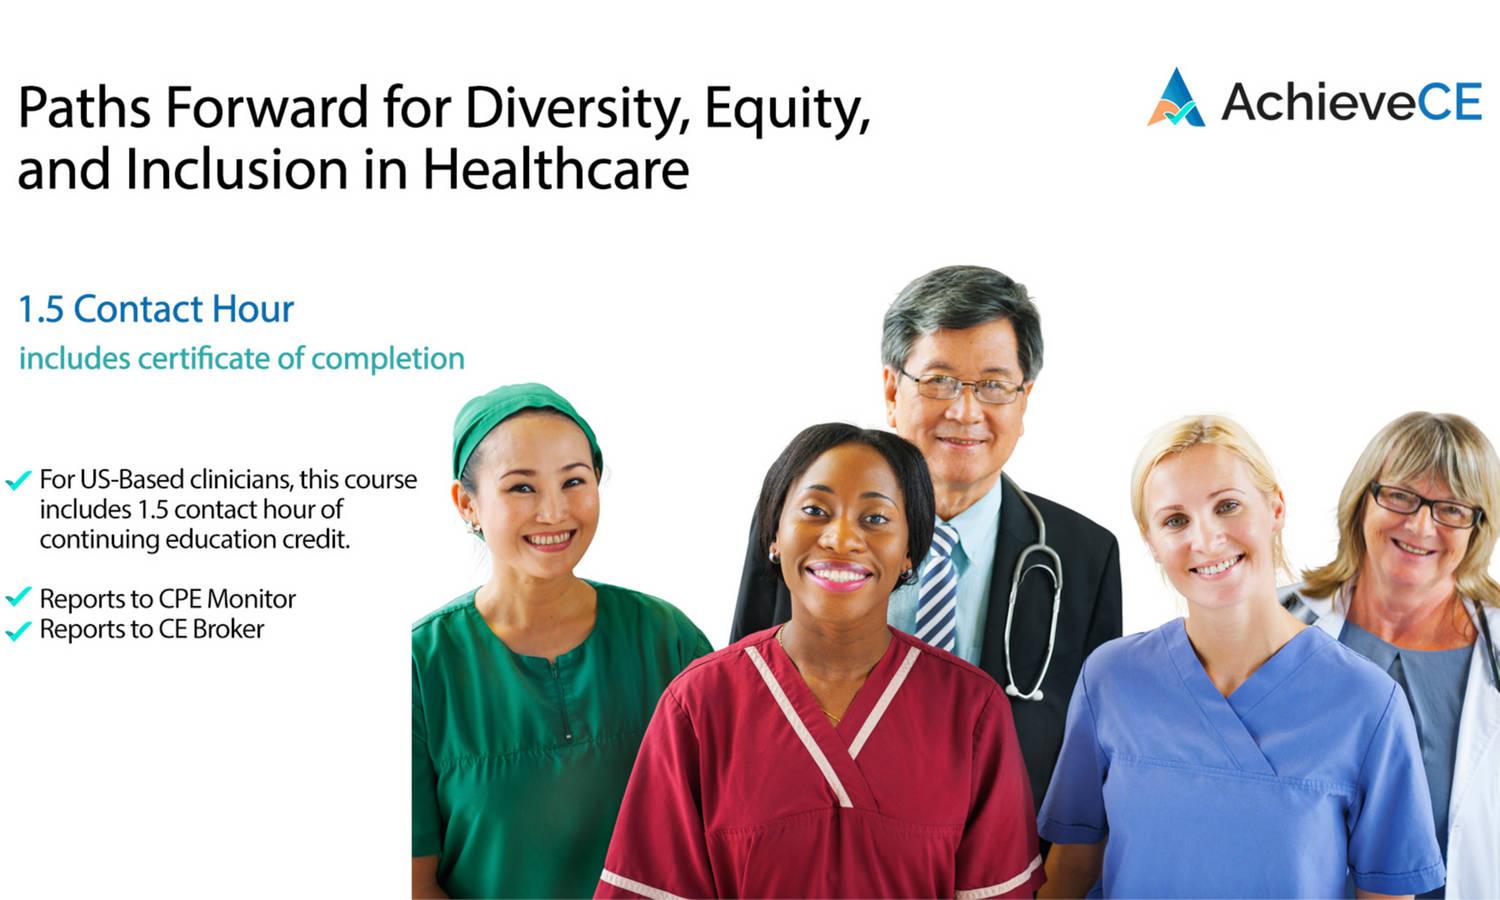 Paths Forward for Diversity, Equity, and Inclusion in Healthcare